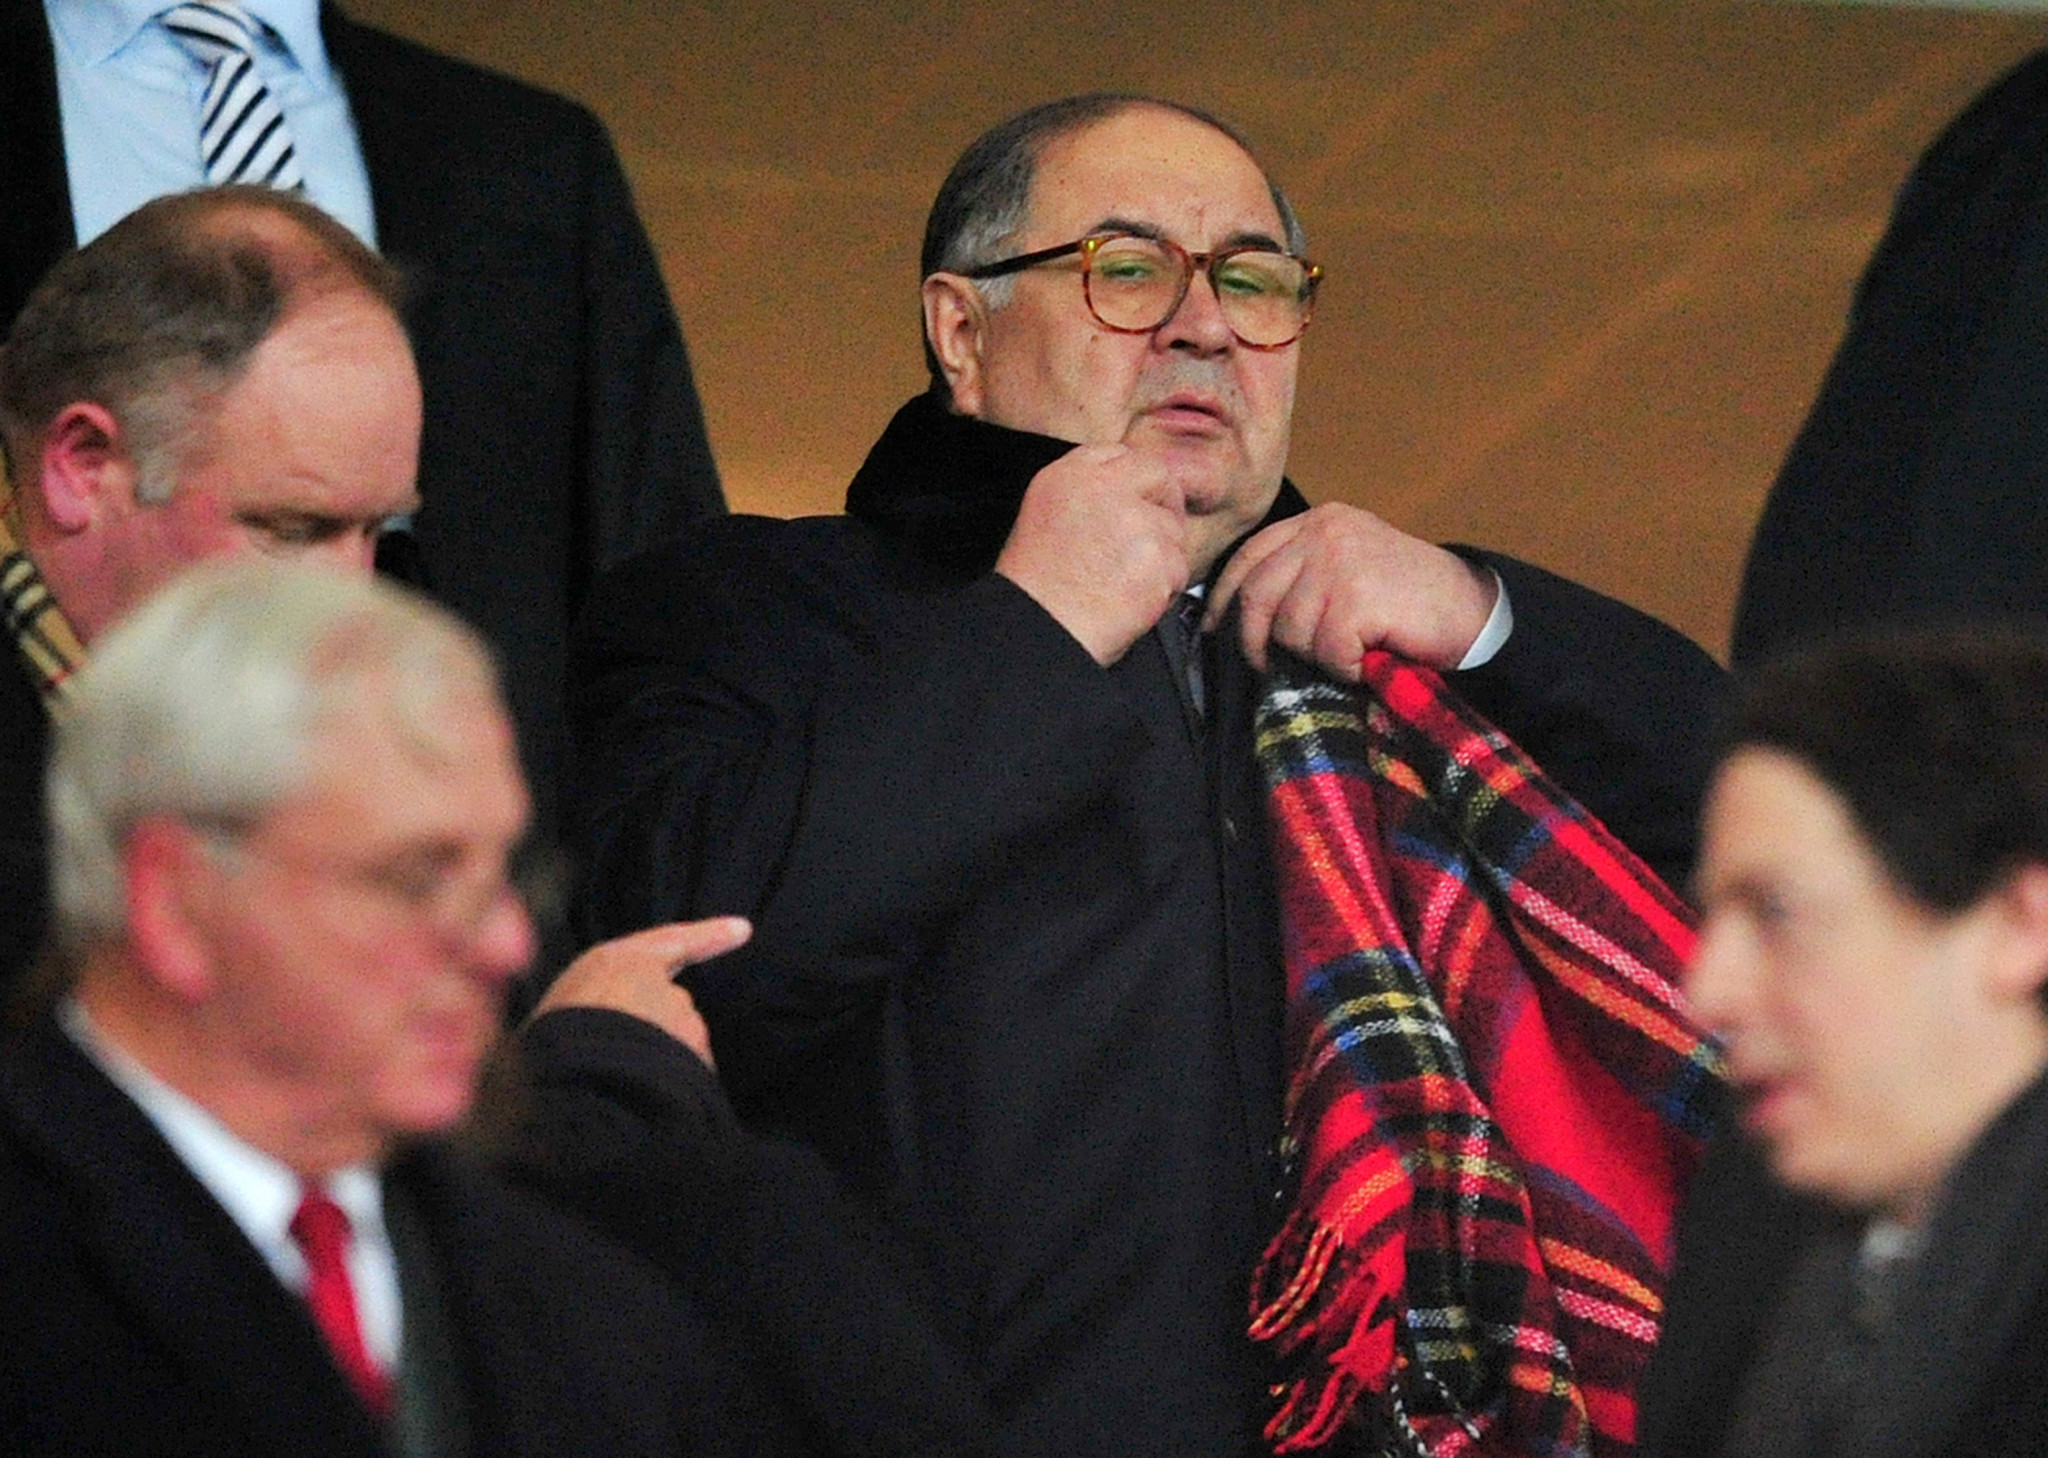 Bayern Munich premises searched as part of Usmanov money laundering investigation